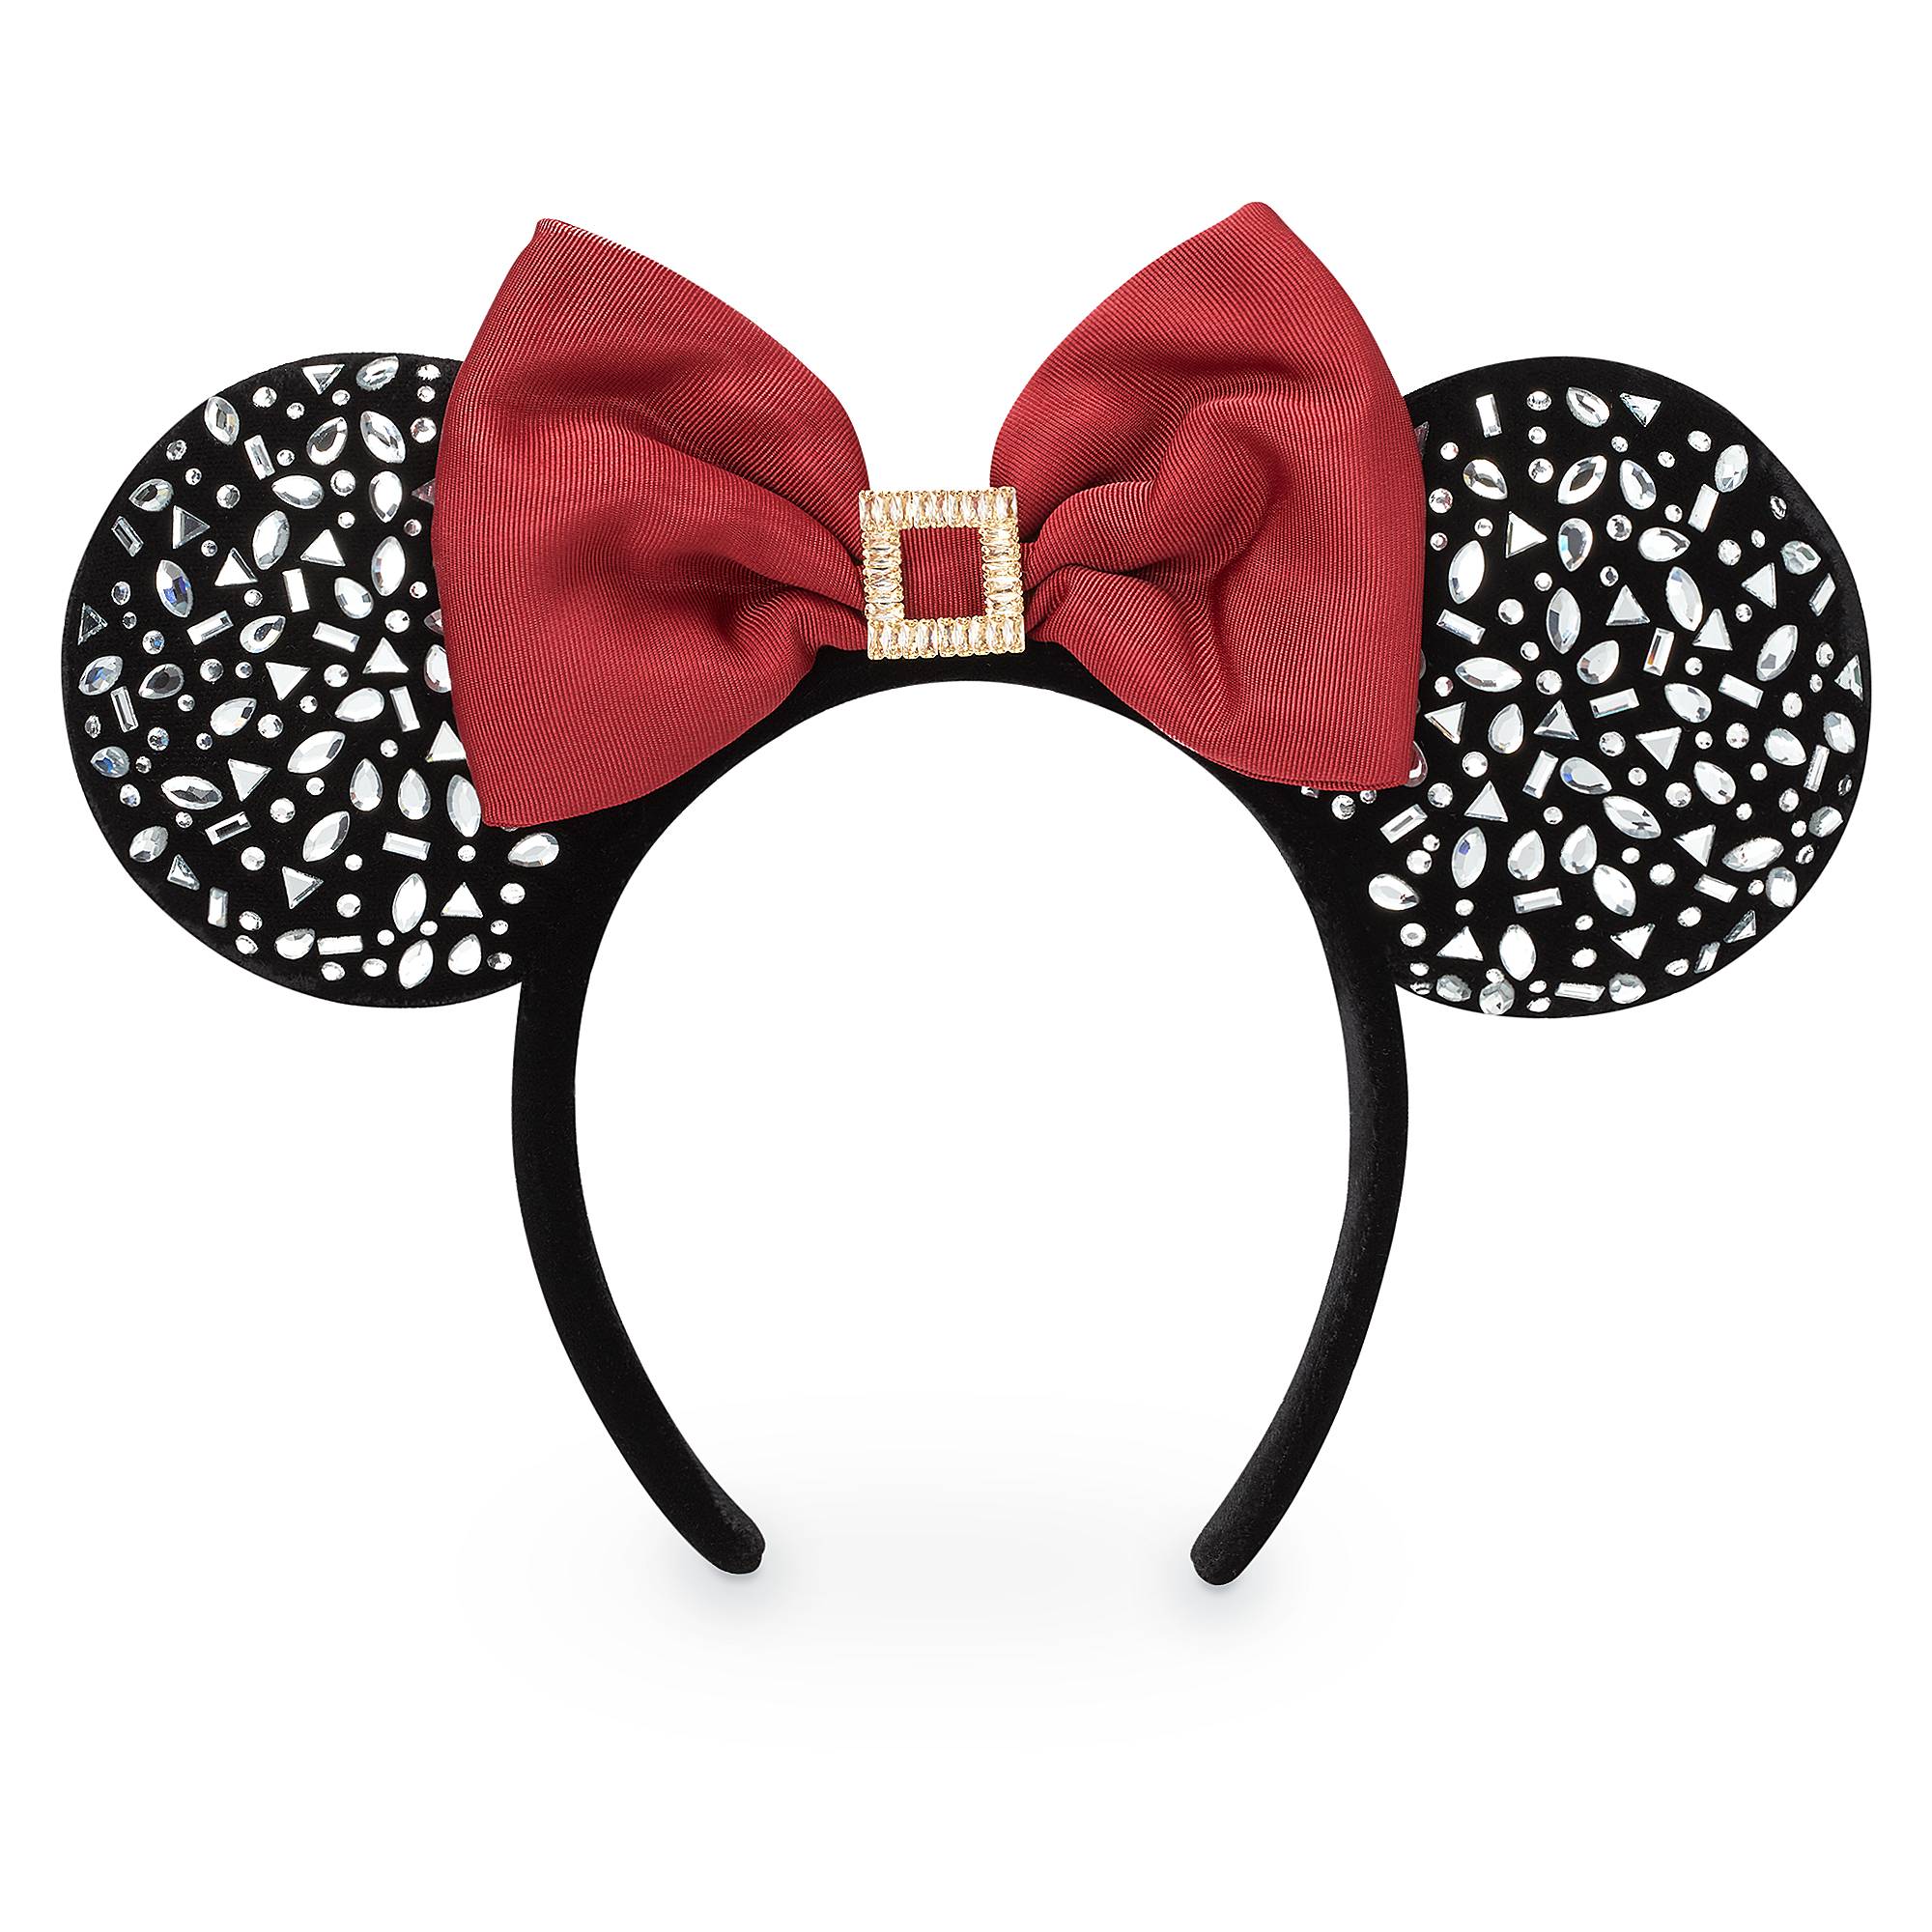 Minnie Mouse Ear Headband for Adults by BaubleBar image